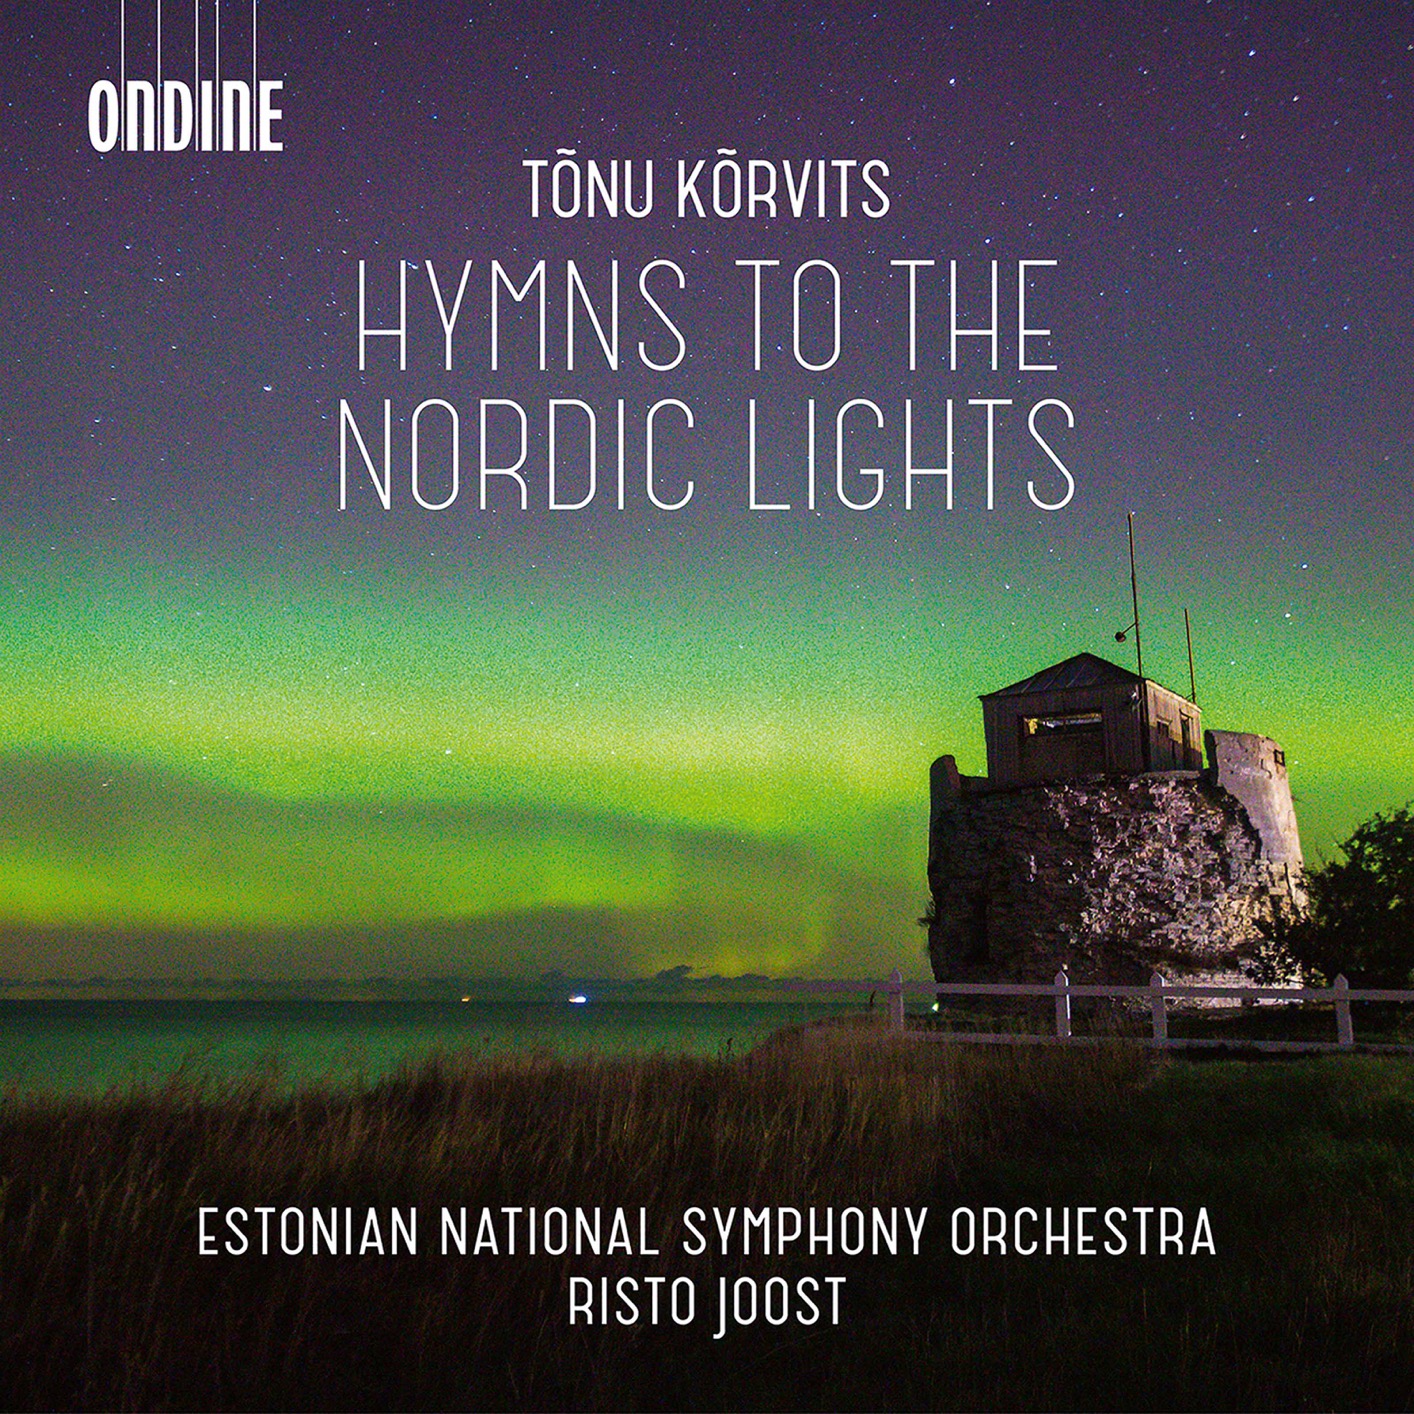 Estonian National Symphony Orchestra & Risto Joost - Tonu Korvits: Hymns to the Nordic Lights & Other Works (2020) [FLAC 24bit/48kHz]